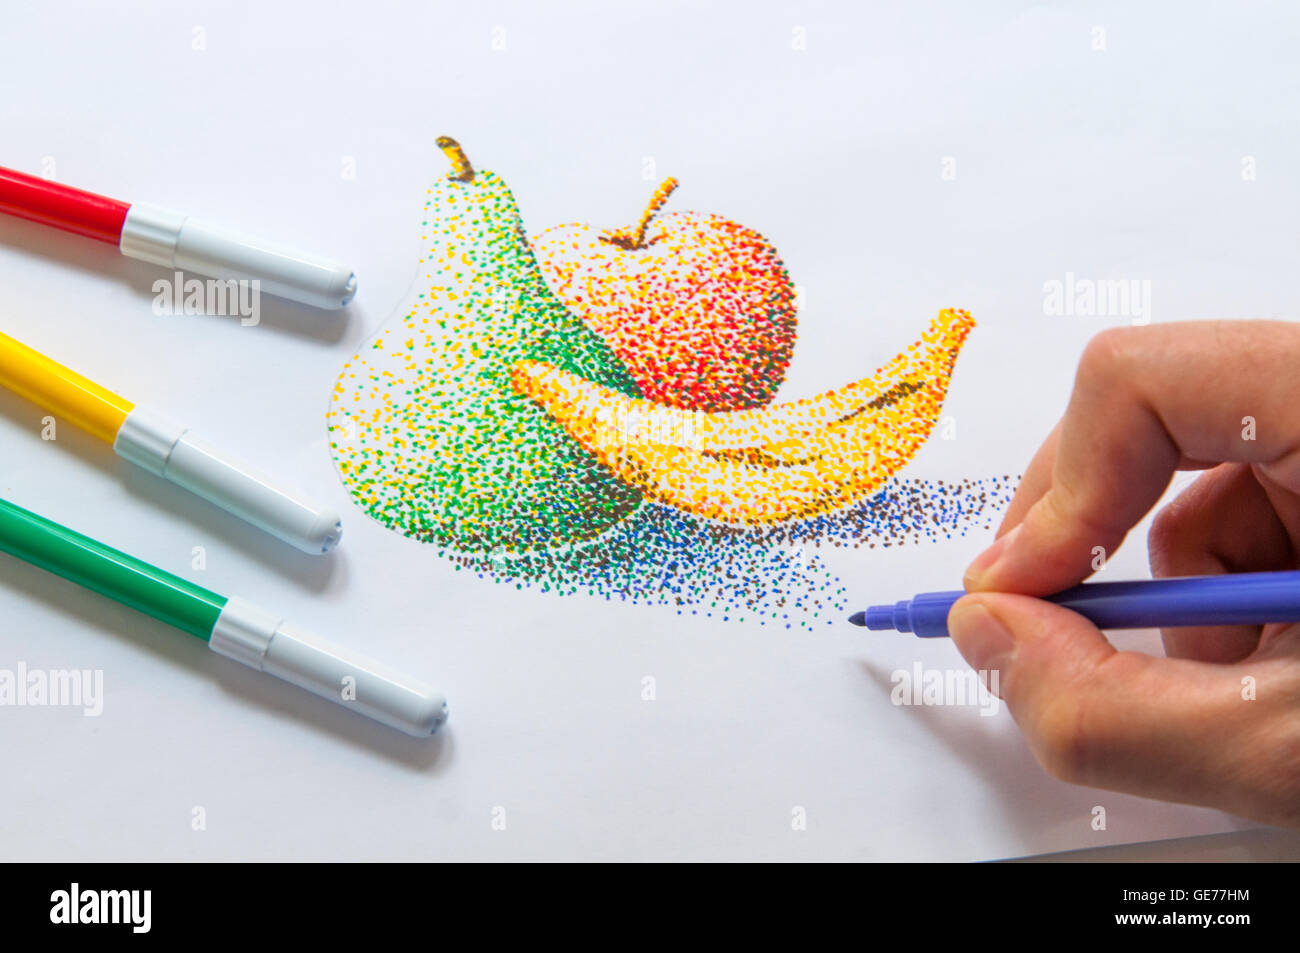 Man's hand drawing a still life using color markers. Pointillism technique. Stock Photo